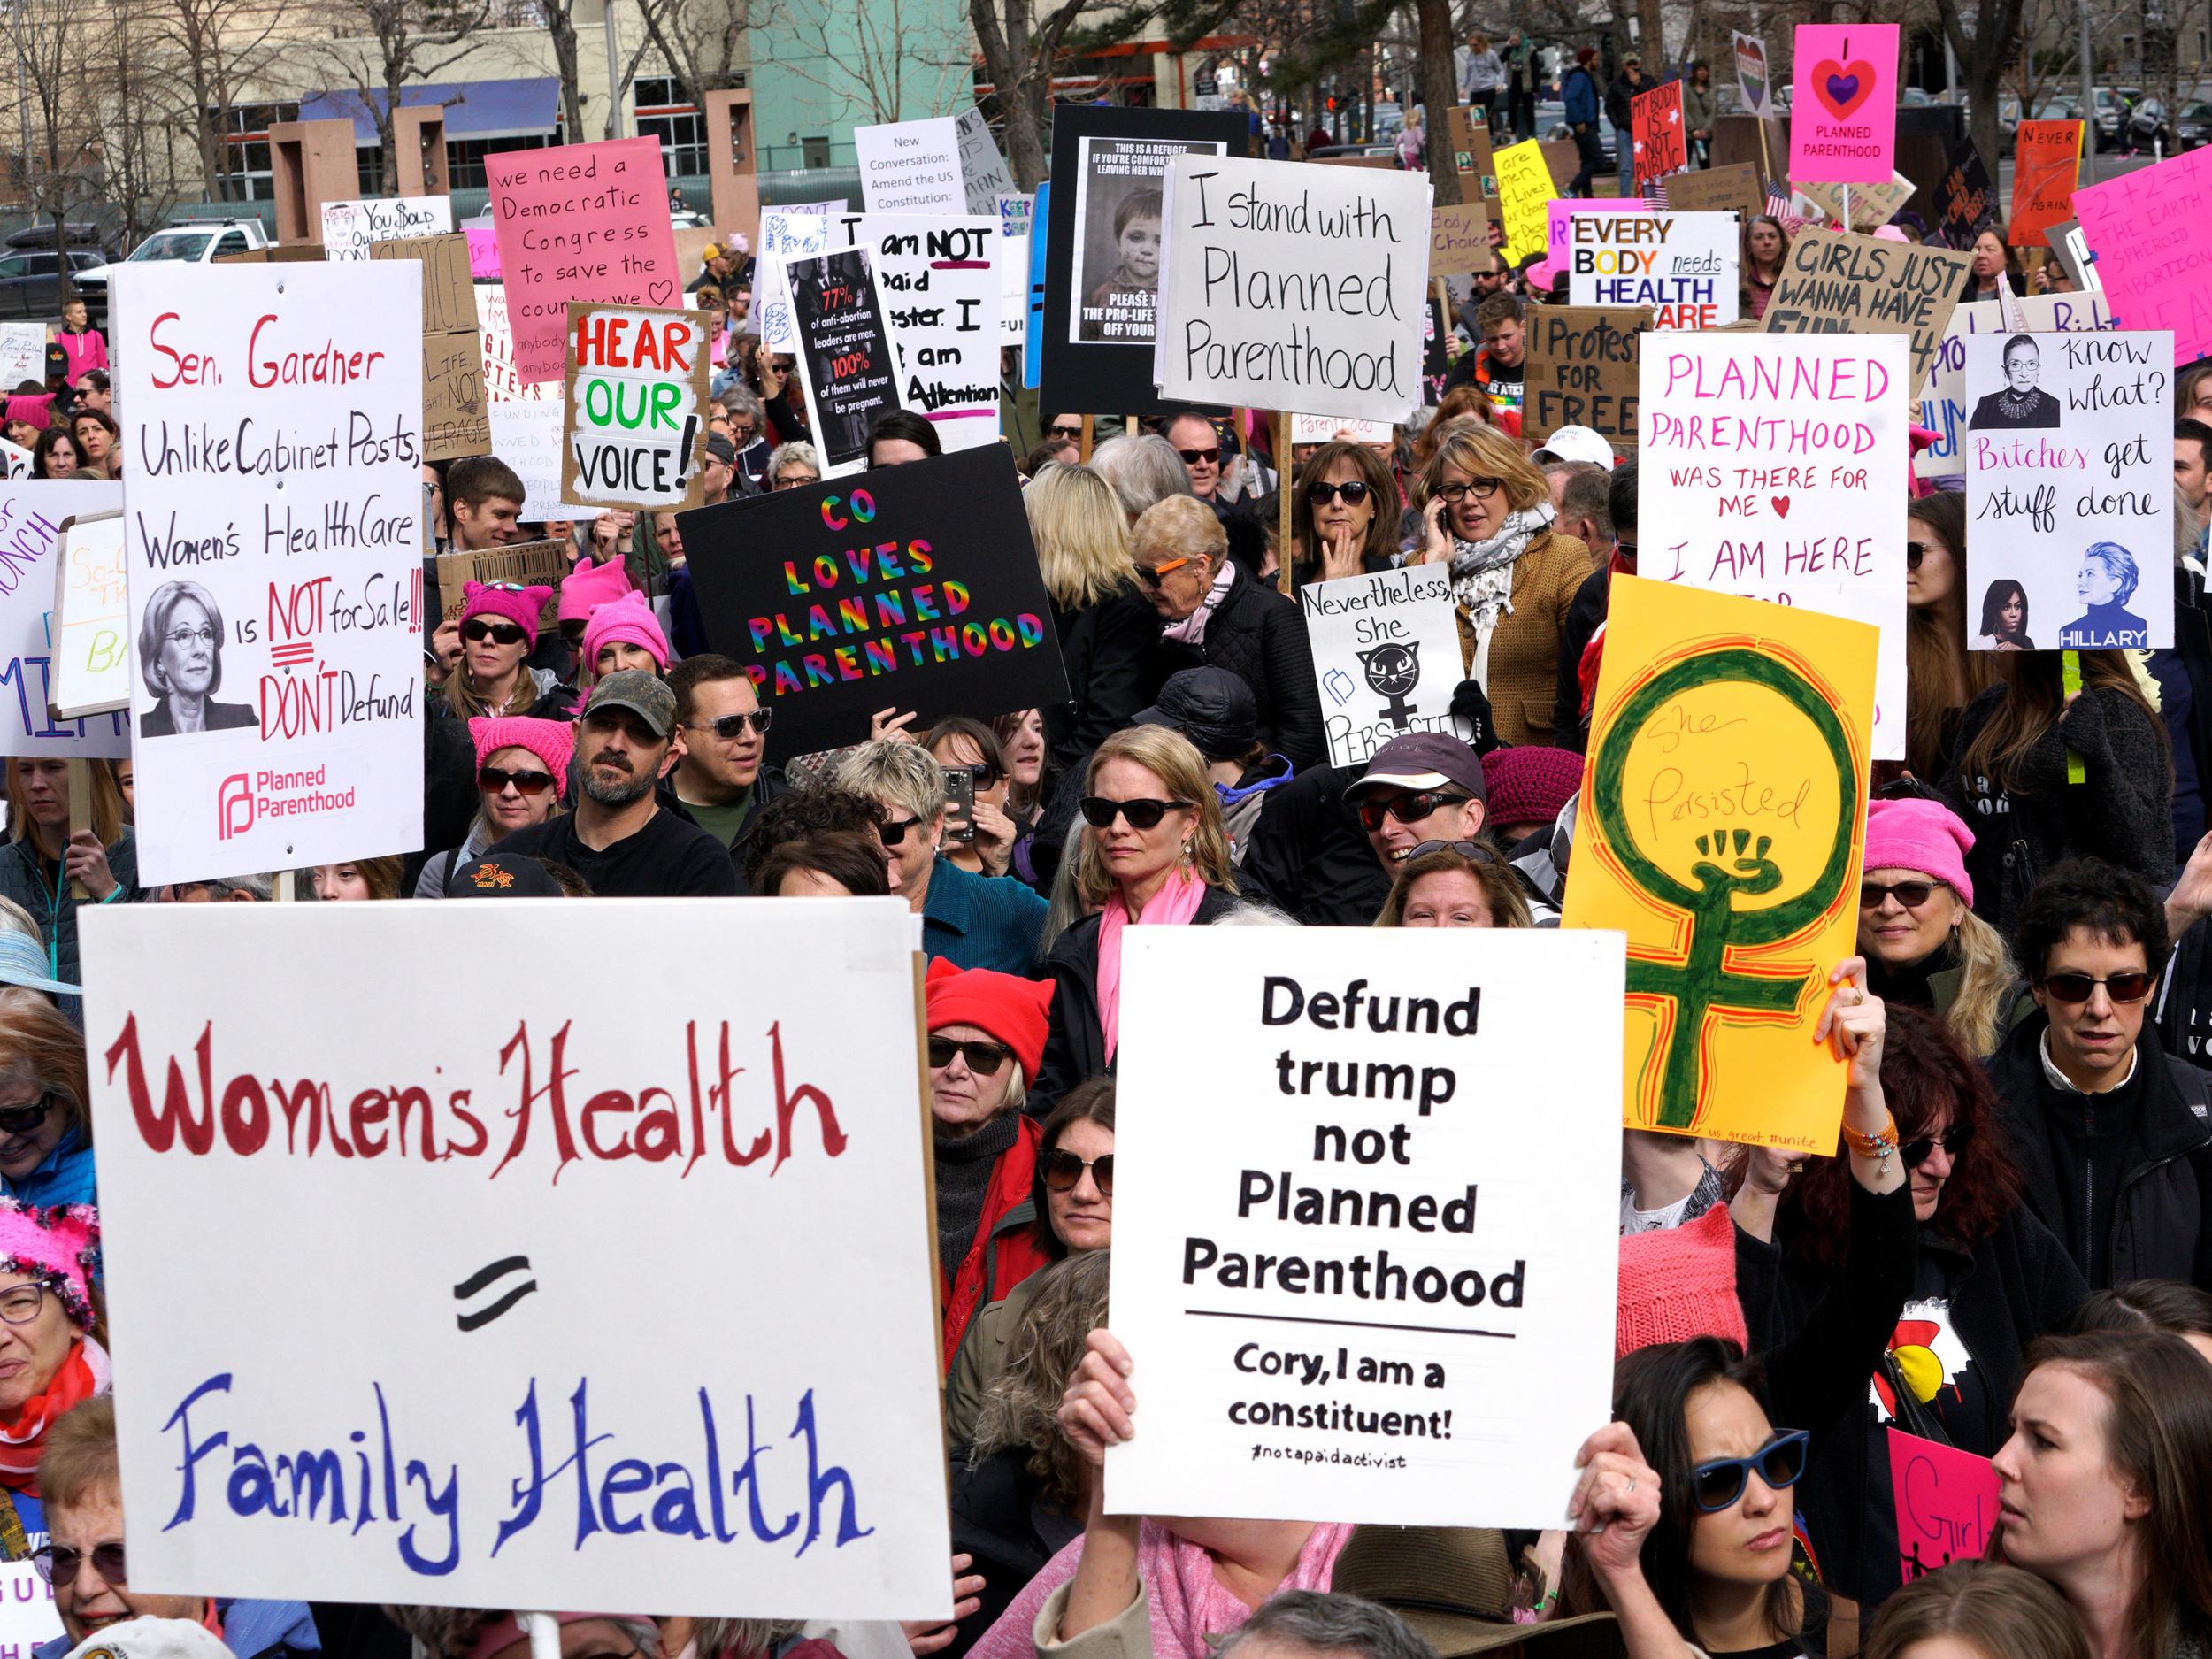 Abortion remains a deeply divisive subject in the US